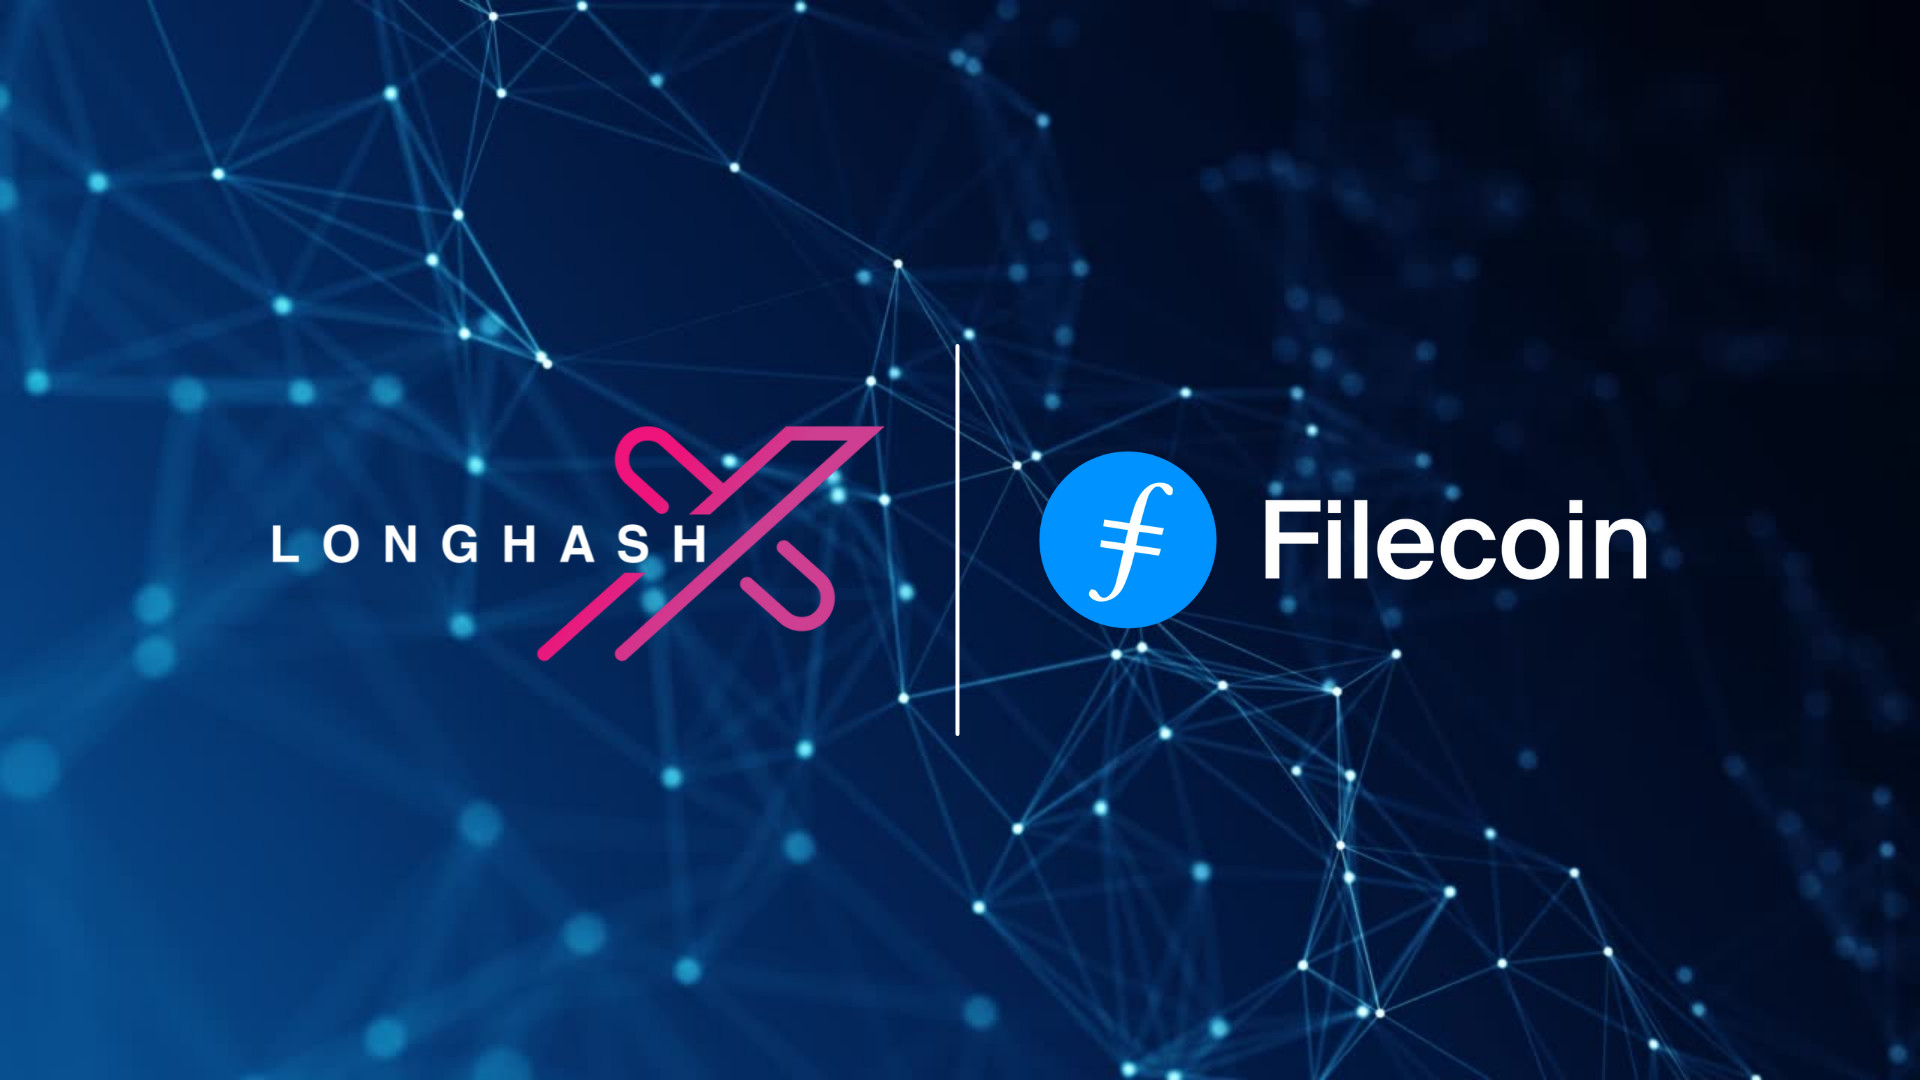 LongHash Ventures Partners With Protocol Labs to Launch the Third LongHashX Accelerator Filecoin Cohort – Blockchain News, Opinion, TV and Jobs